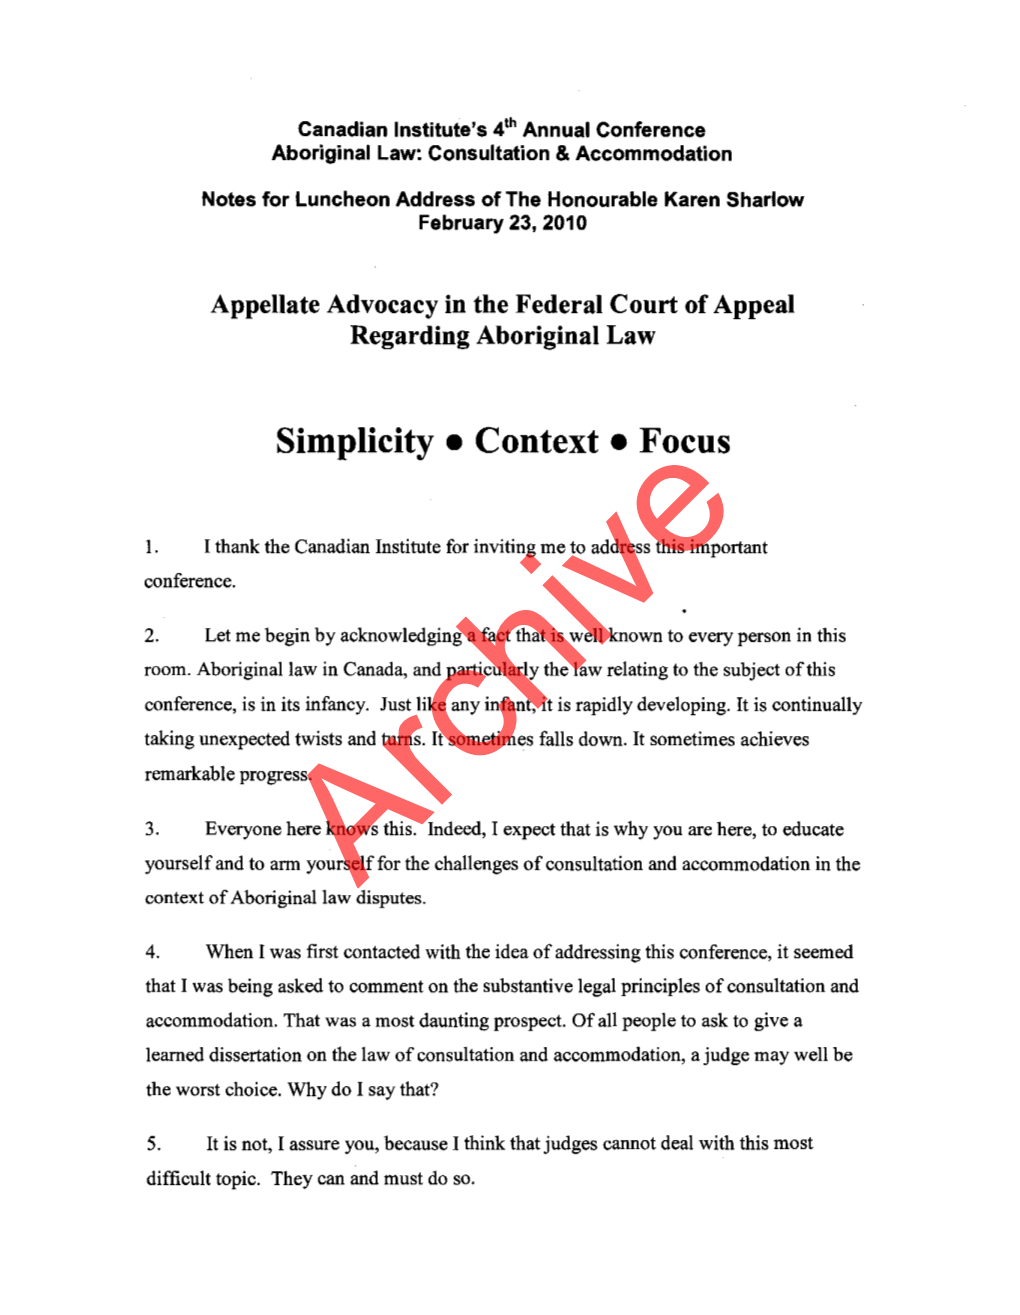 Appellate Advocacy in the Federal Court of Appeal Regarding Aboriginal Law